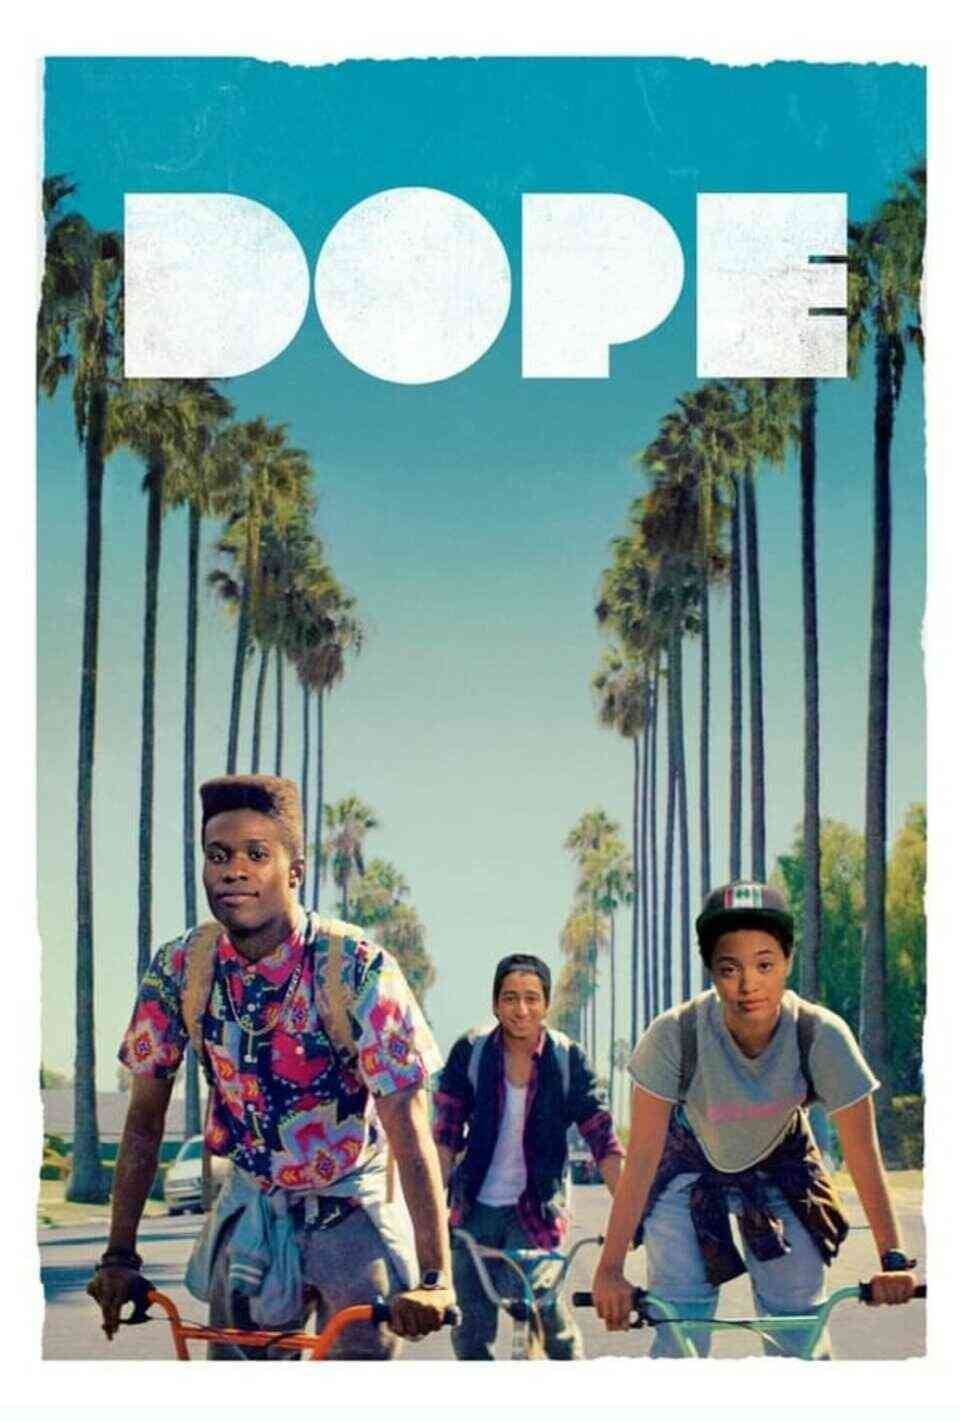 Read Dope screenplay (poster)